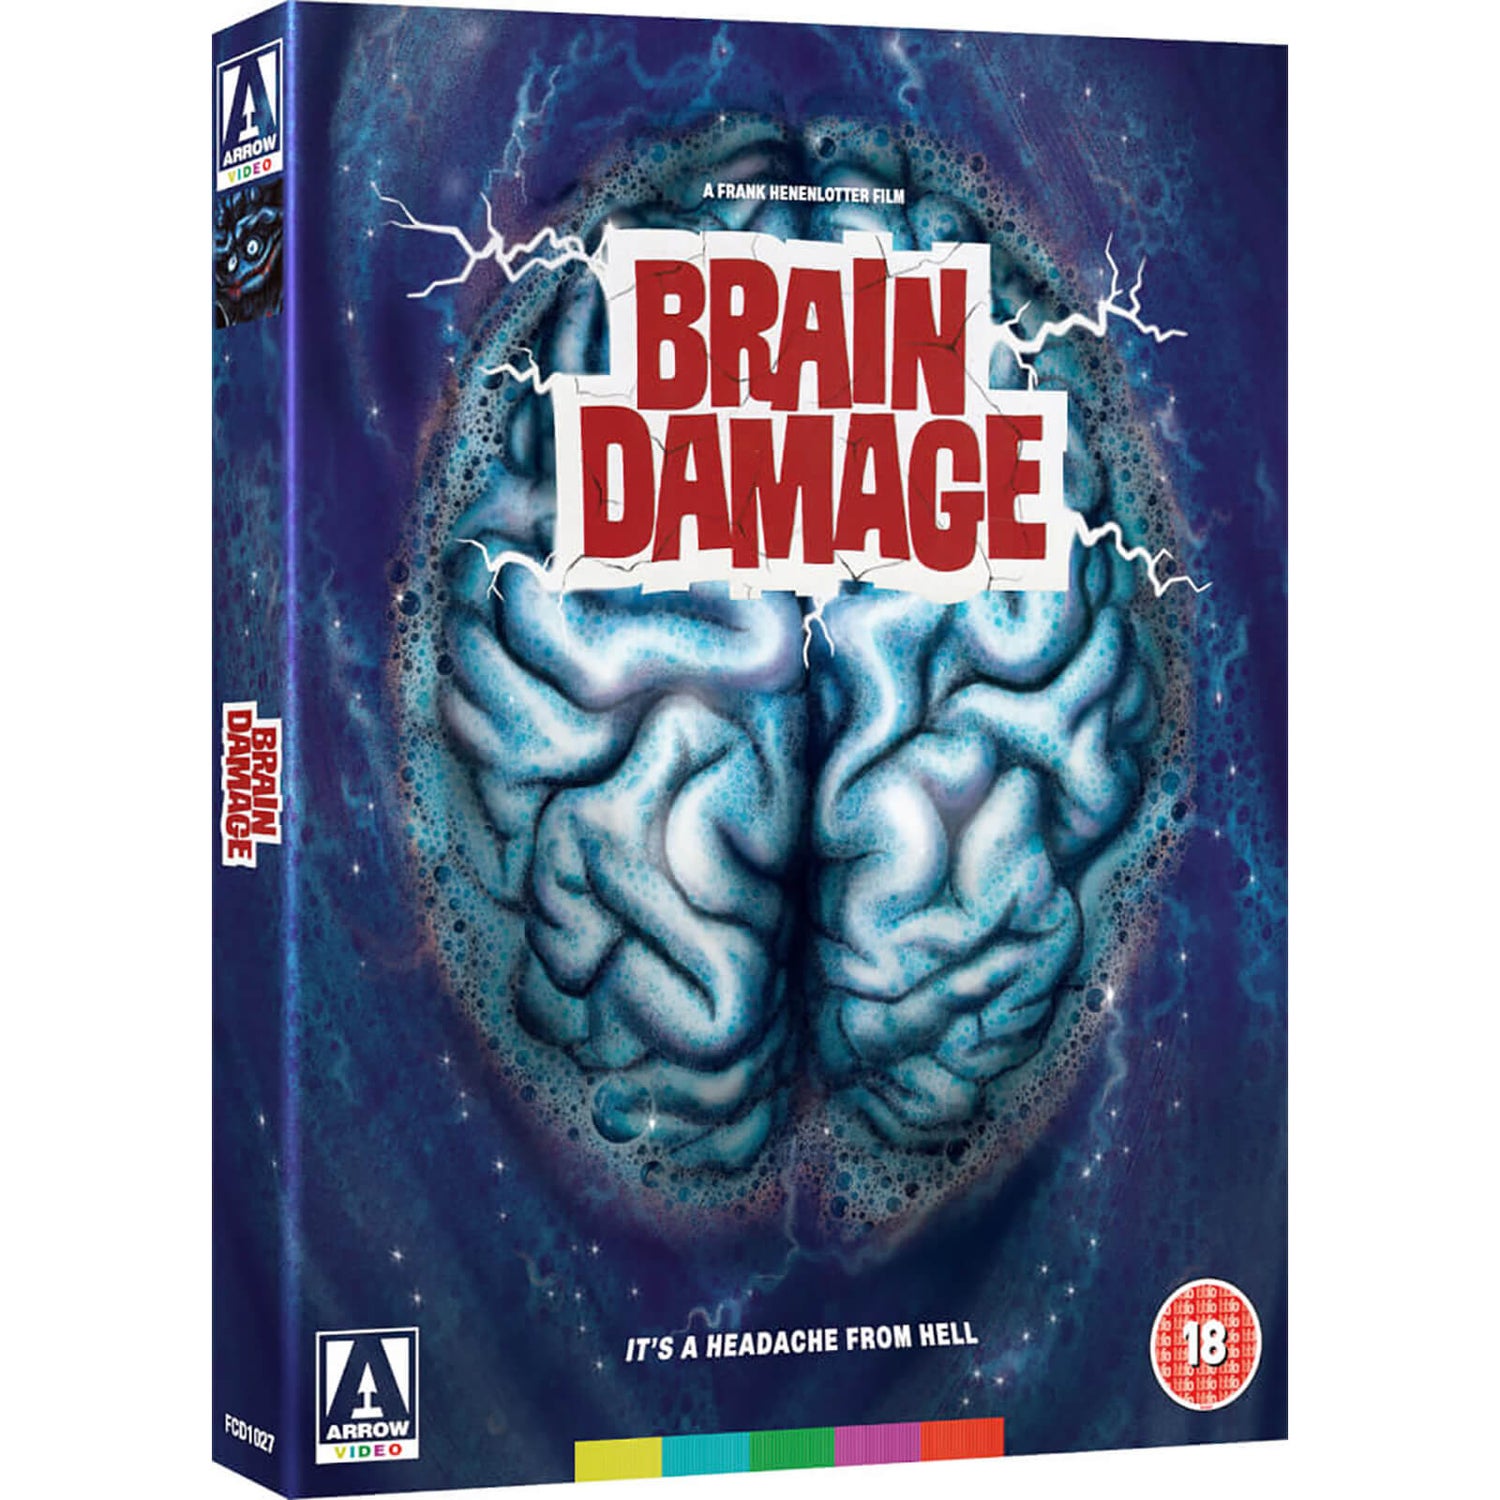 Brain Damage - Dual Format (Includes DVD) (Limited Edition)